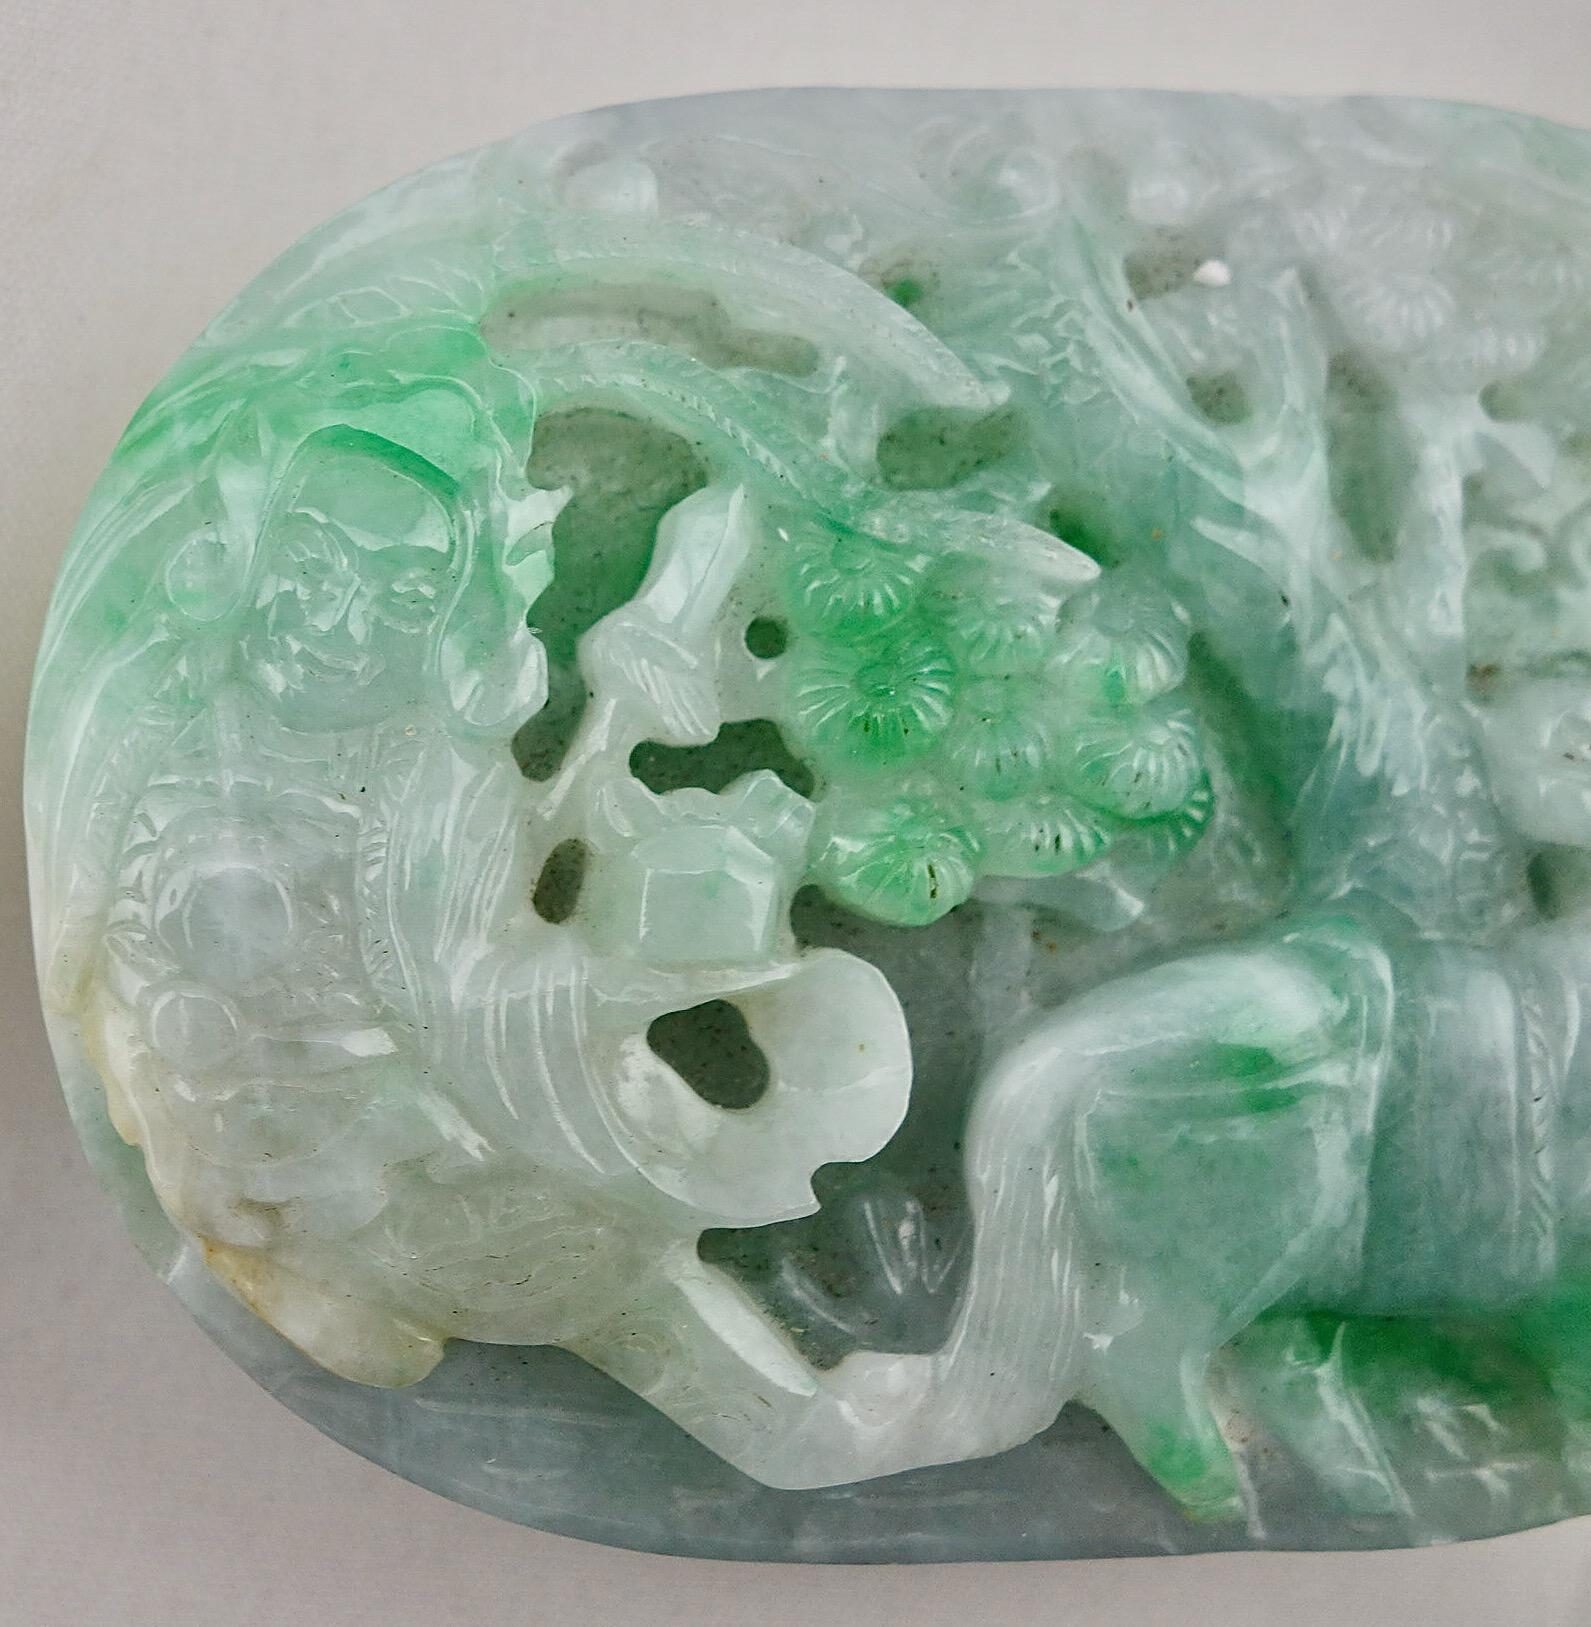 Chinese green and white jade hand carved high relief belt buckle, 19th century. The buckle depicts a maiden under a tree, and a horse in high relief. Obverse covered with scroll designs. The buckle is 2 1/2